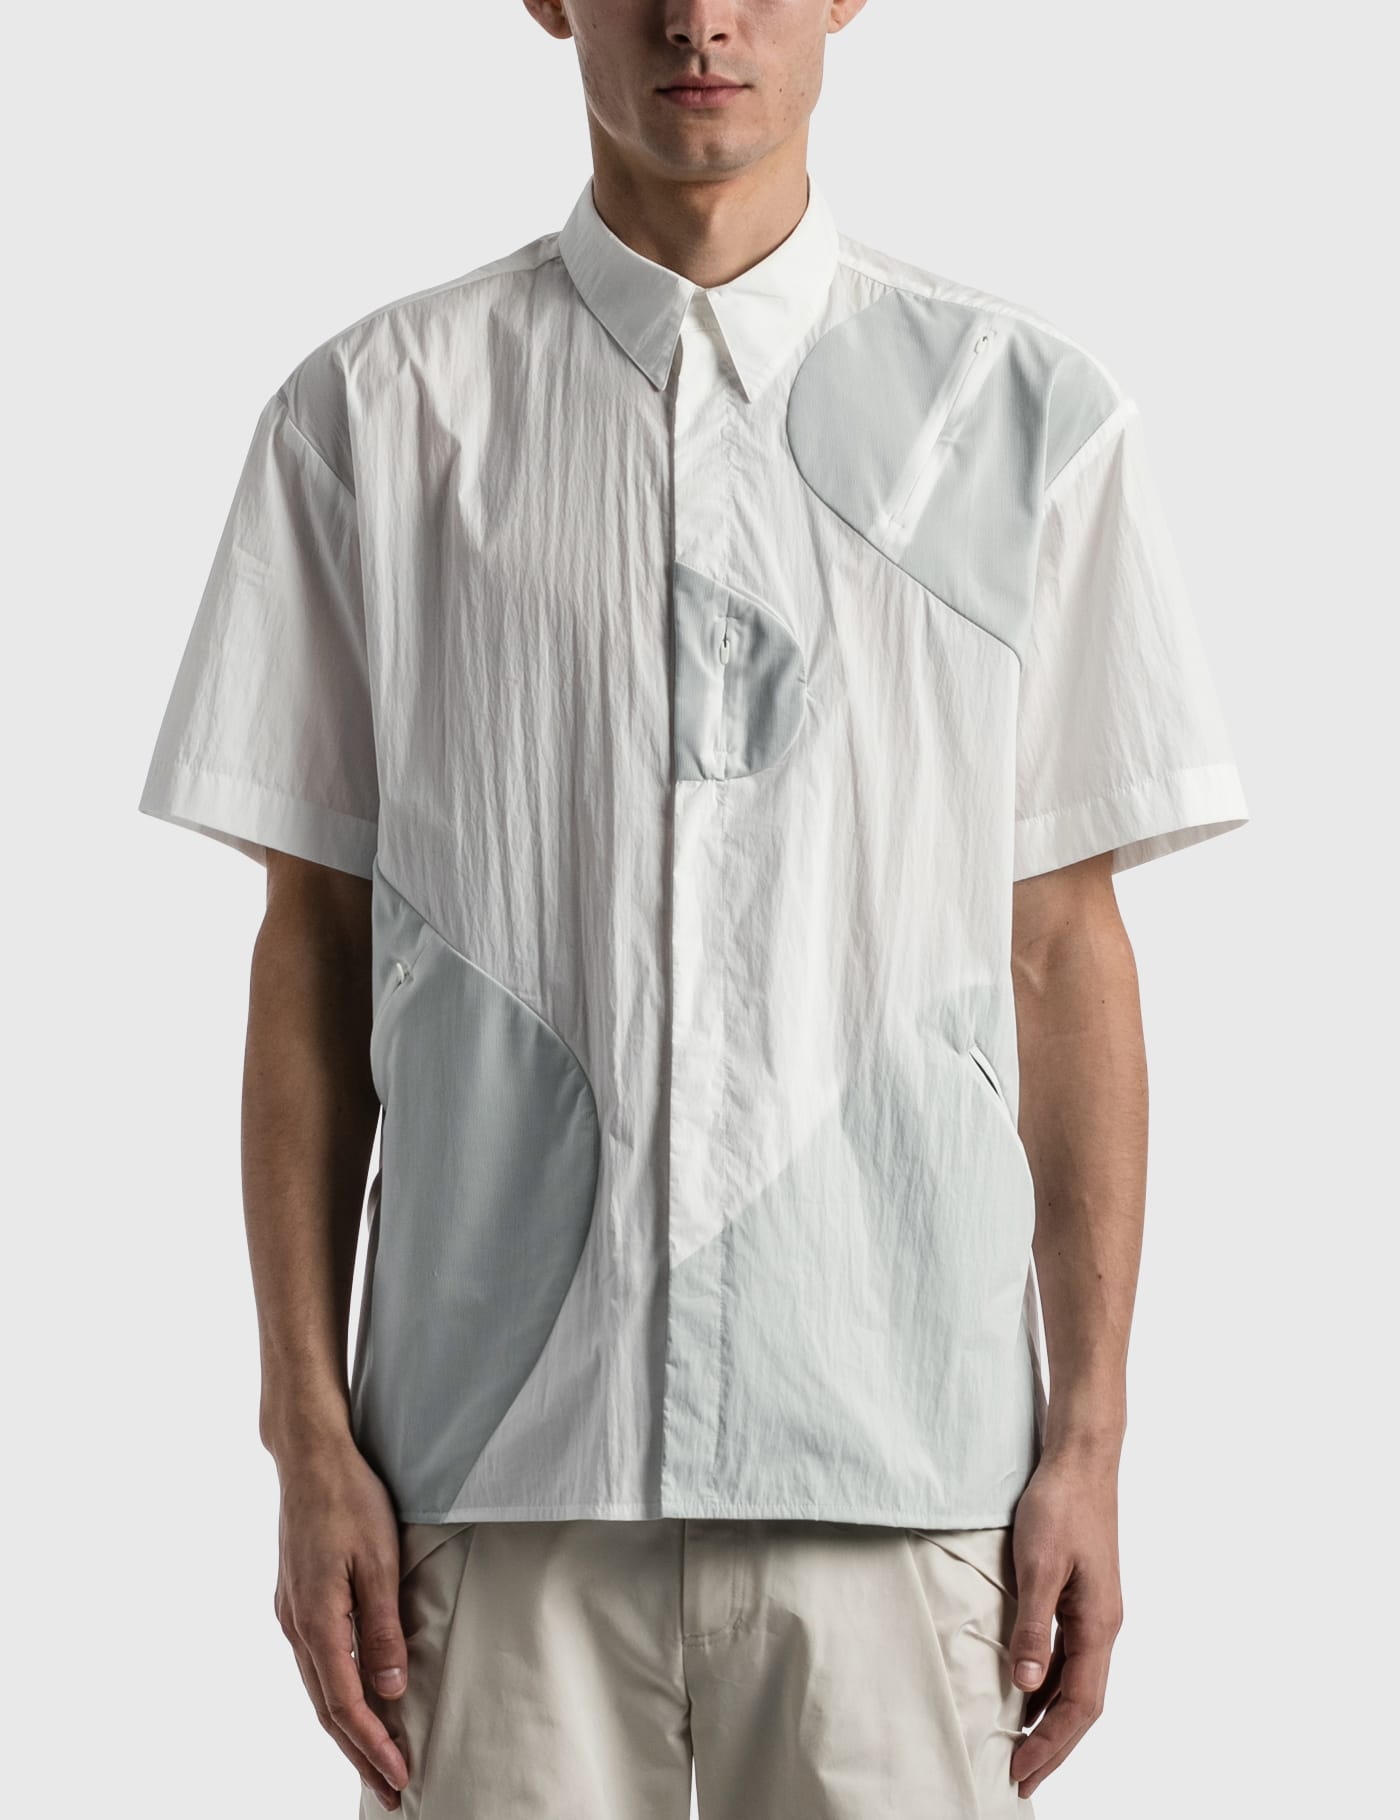 POST ARCHIVE FACTION (PAF) - 4.0 Shirts Center | HBX - Globally 